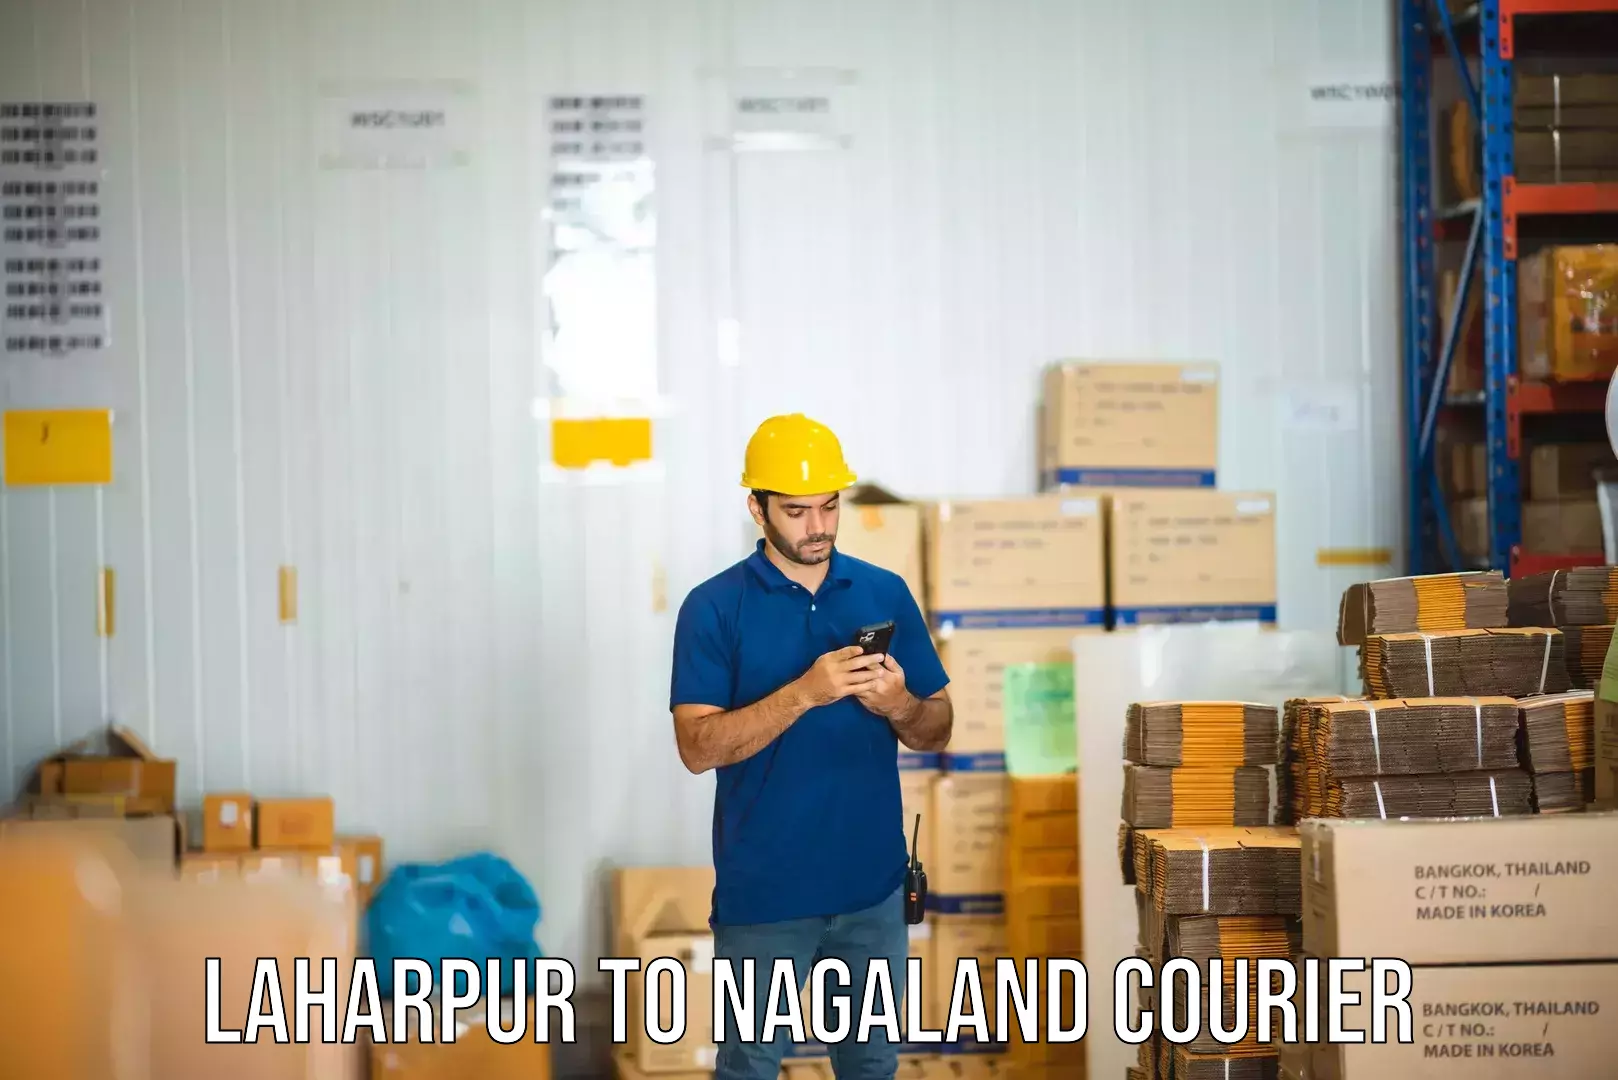 24/7 shipping services in Laharpur to Mon